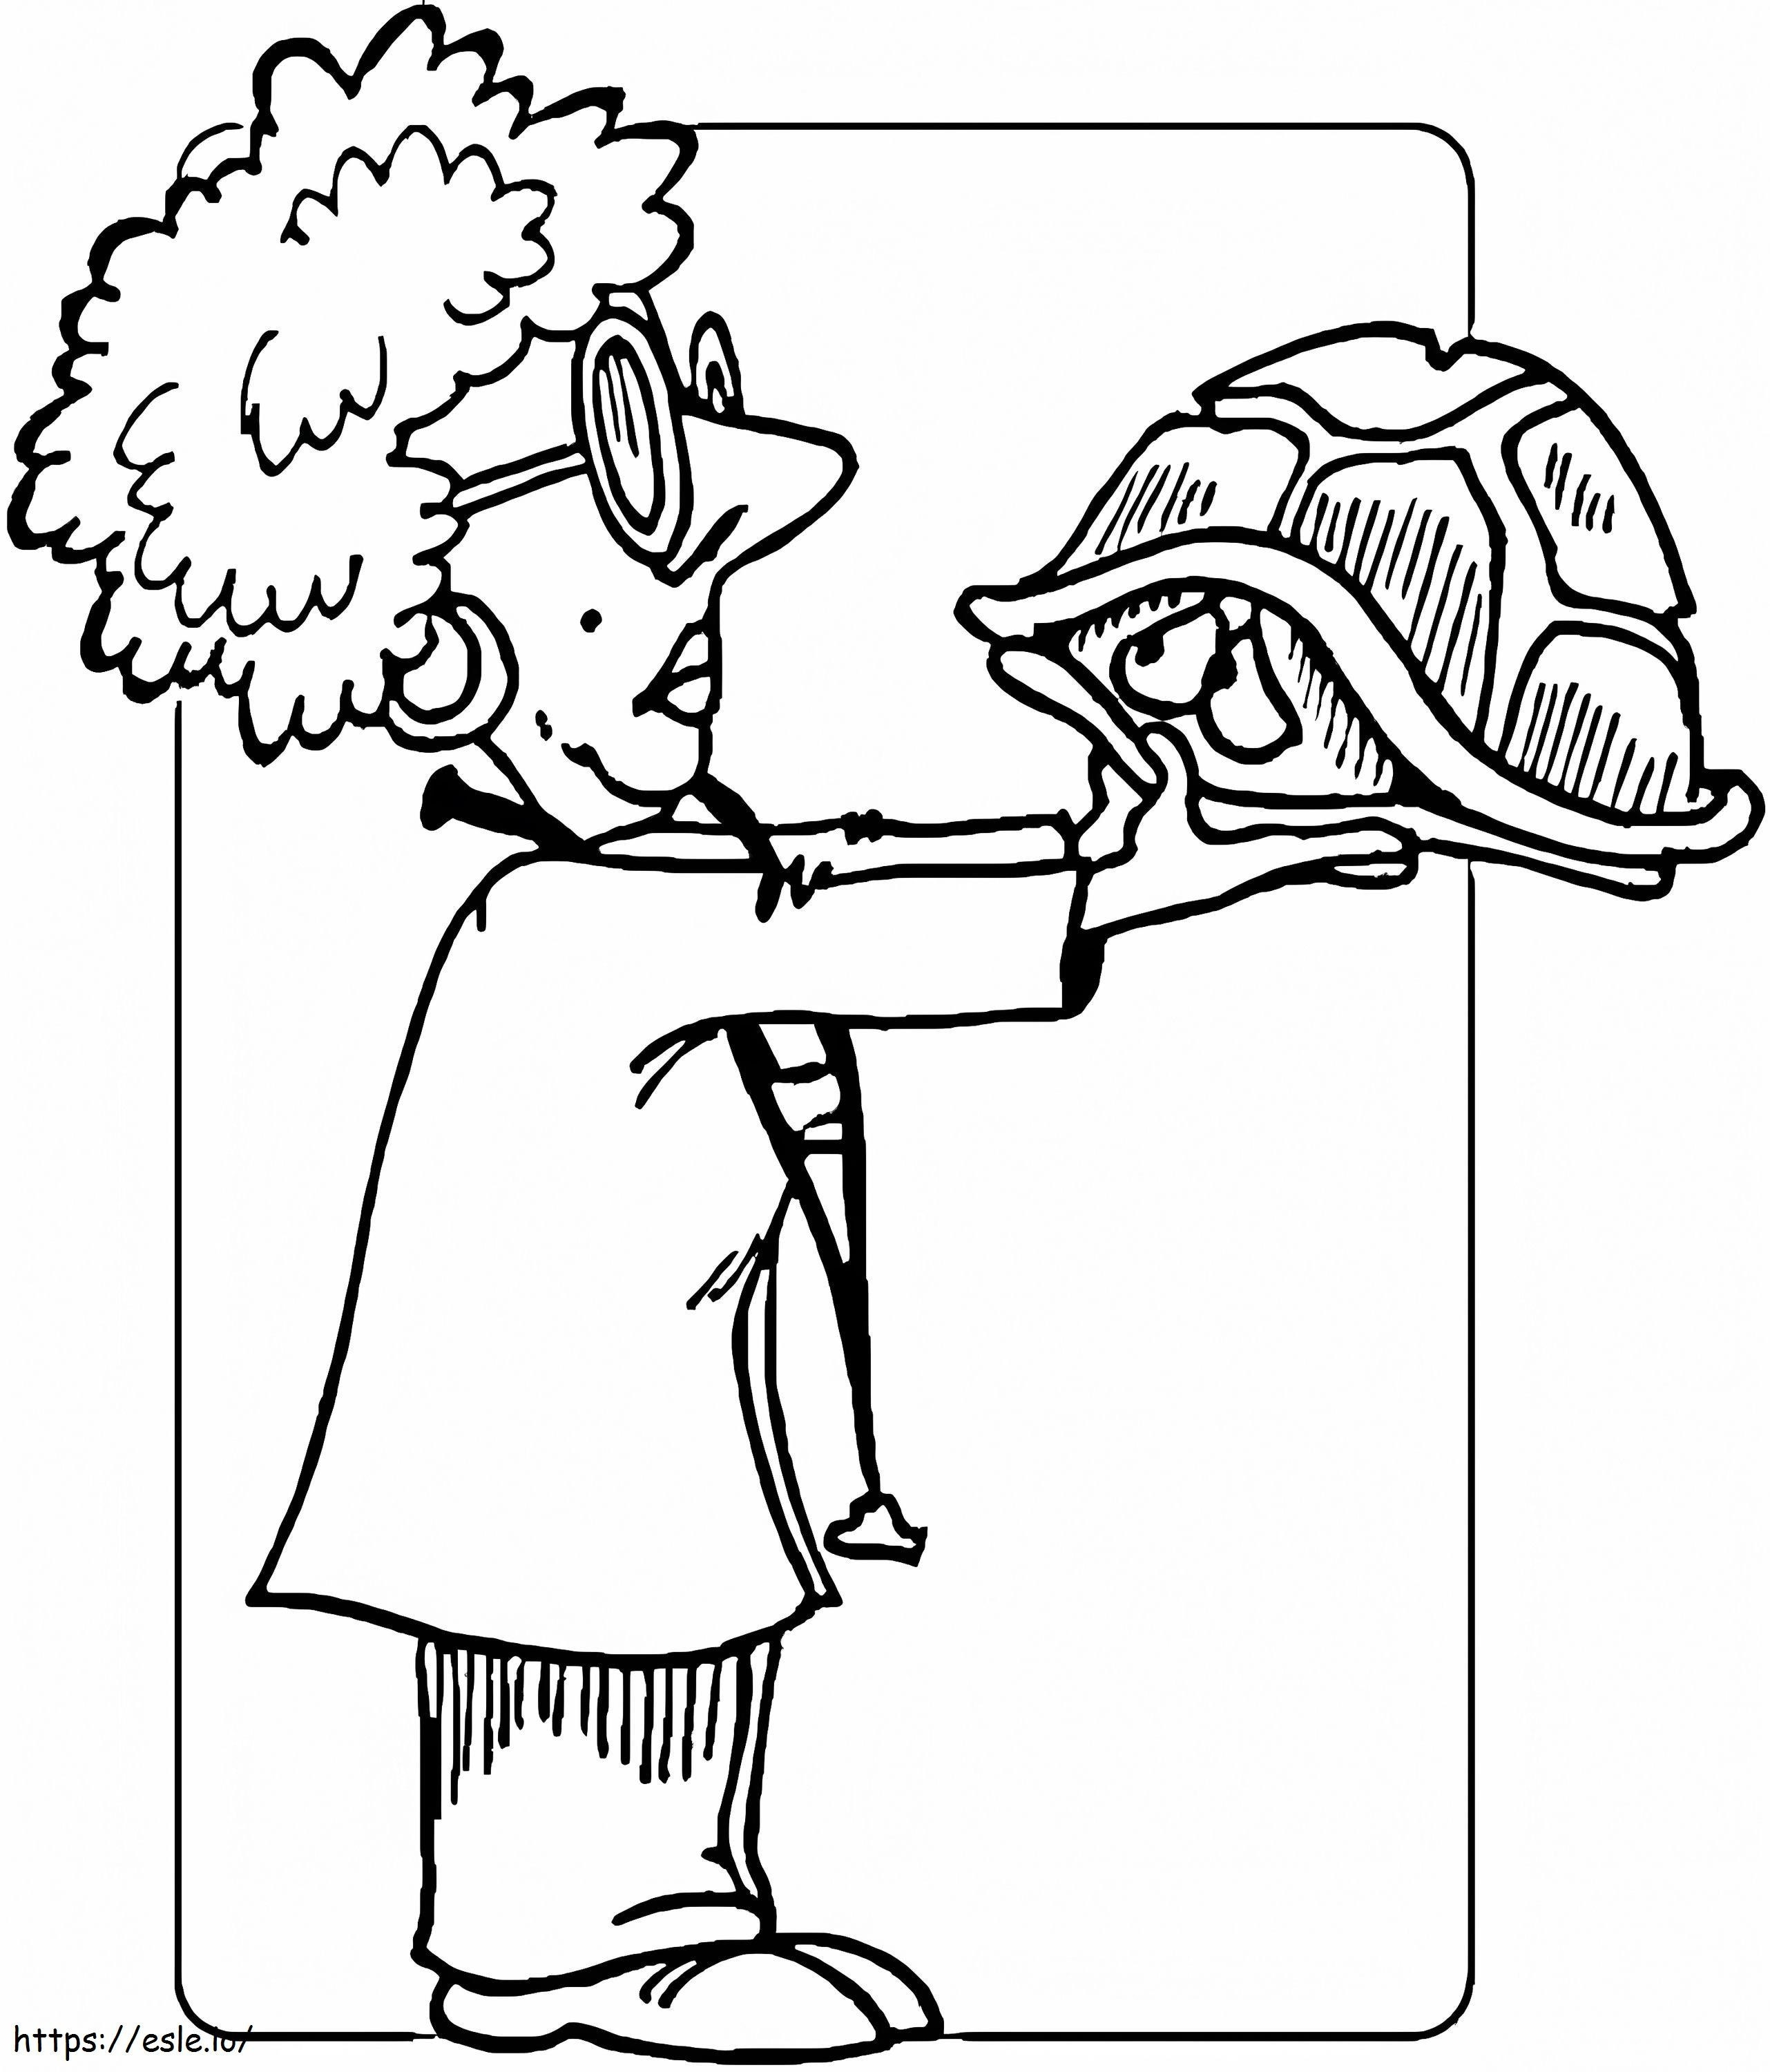 Veterinarian And A Turtle coloring page